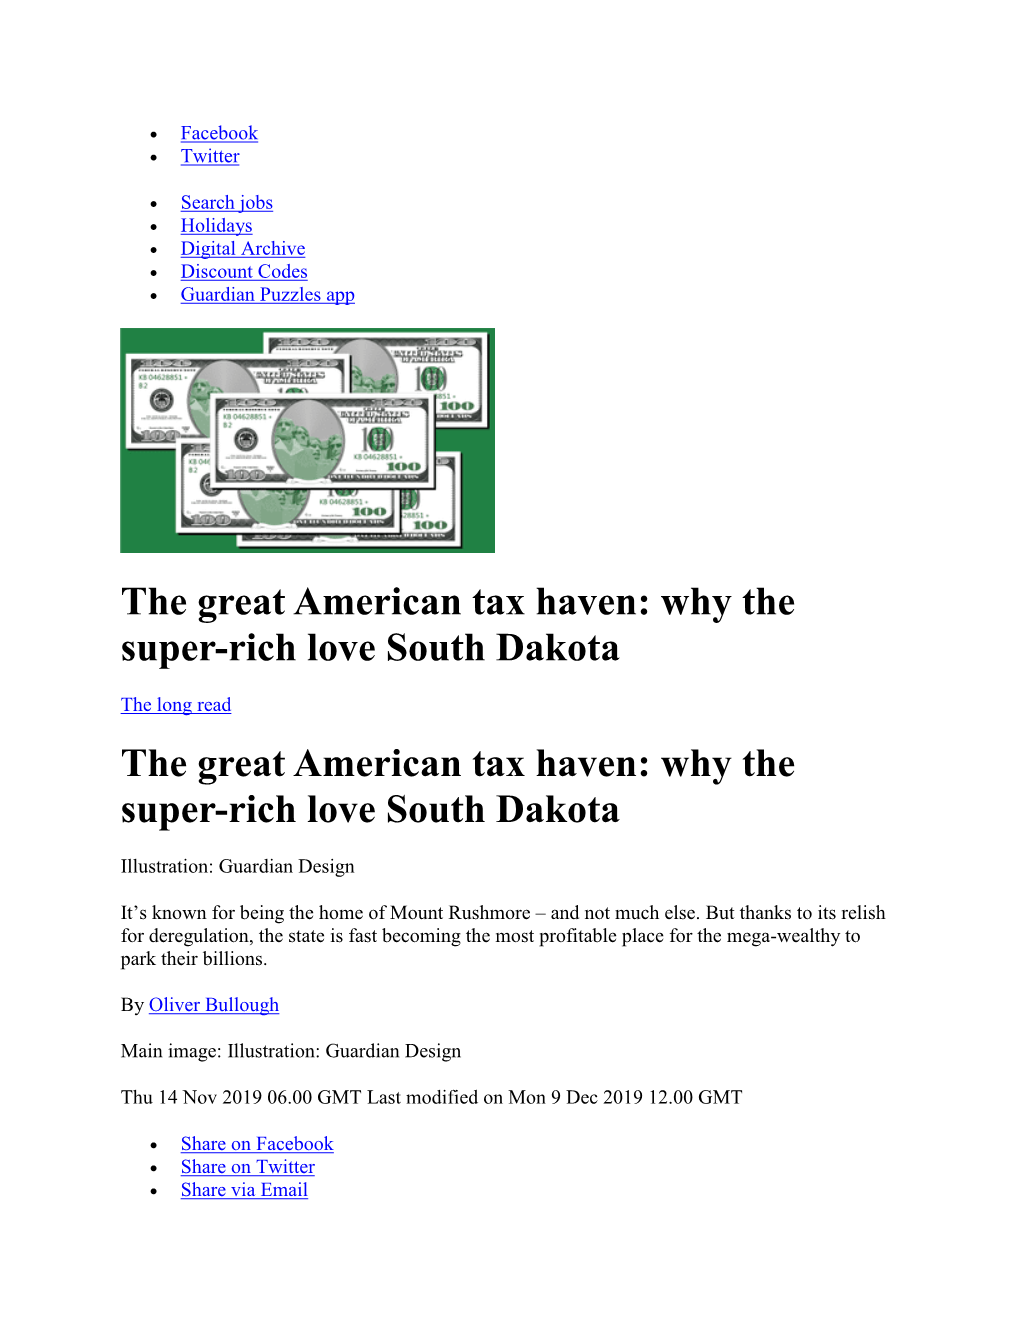 Why the Super-Rich Love South Dakota the Great